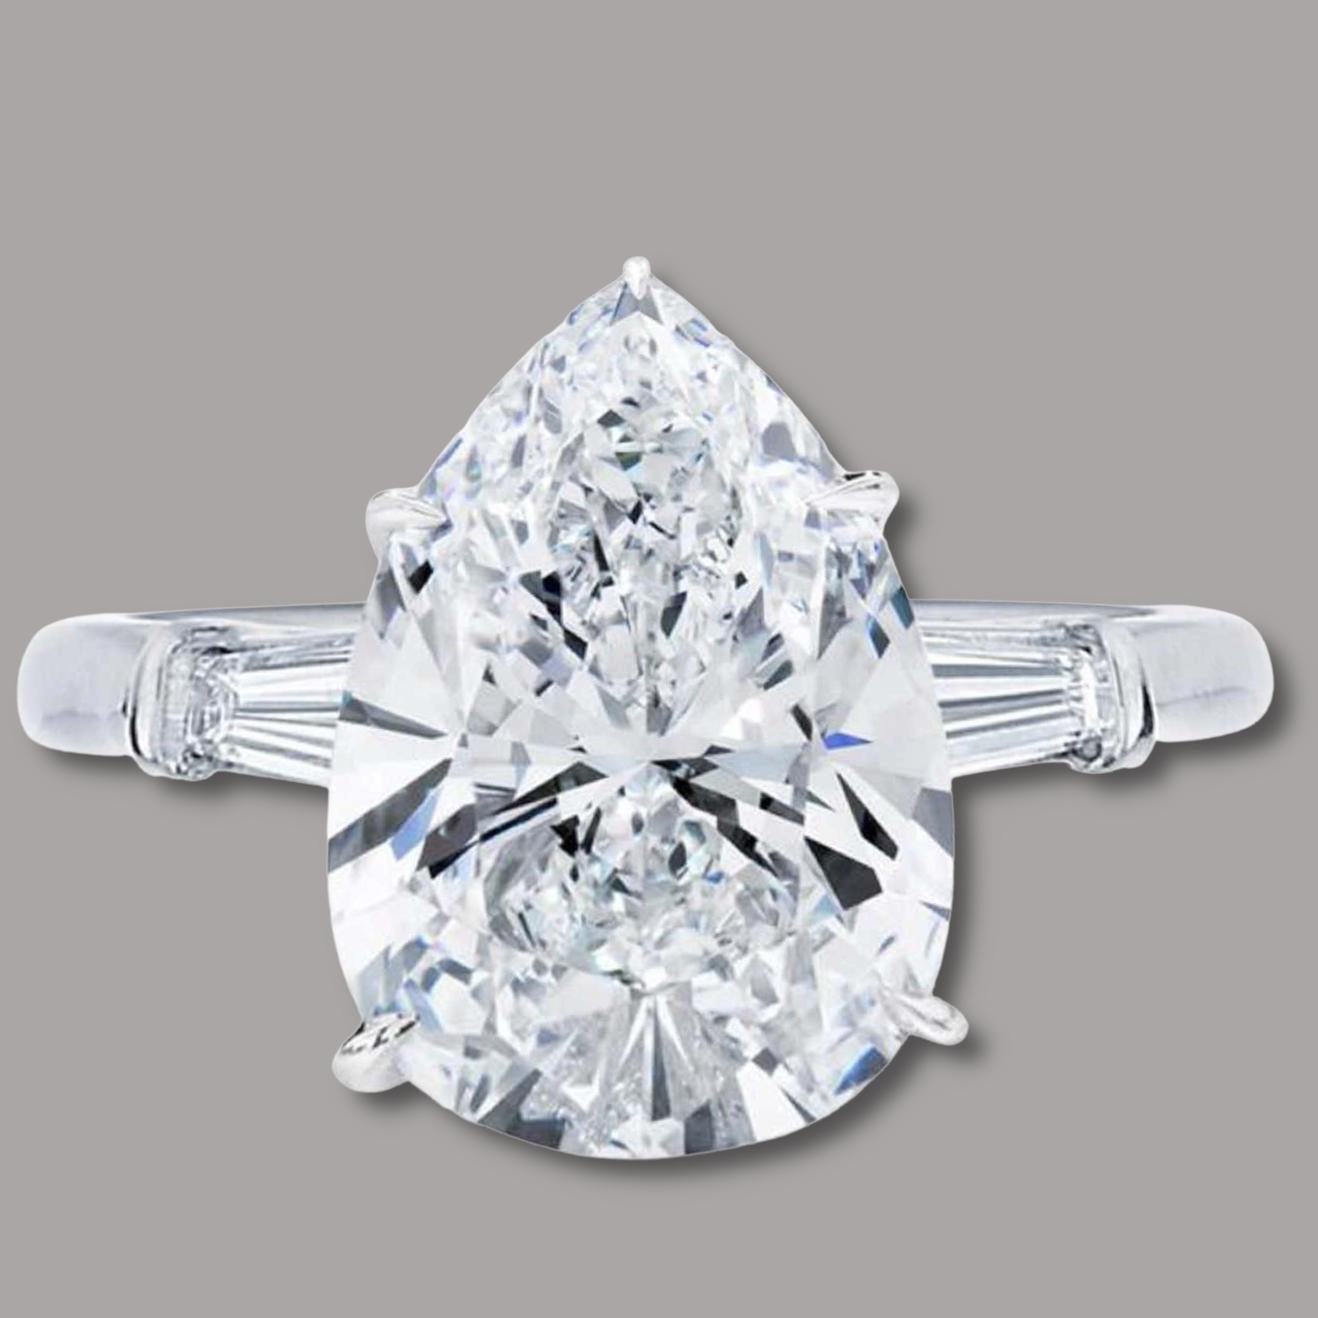 EXCEPTIONAL GIA Certified 4 Carat Pear Cut Diamond Ring 

Designer: Antinori
Material: 18k Gold
Shape: Pear
Weight: 4ct
Colour: F
Clarity: VS2

Ring Size: 6.5 (complimentary sizing available)
